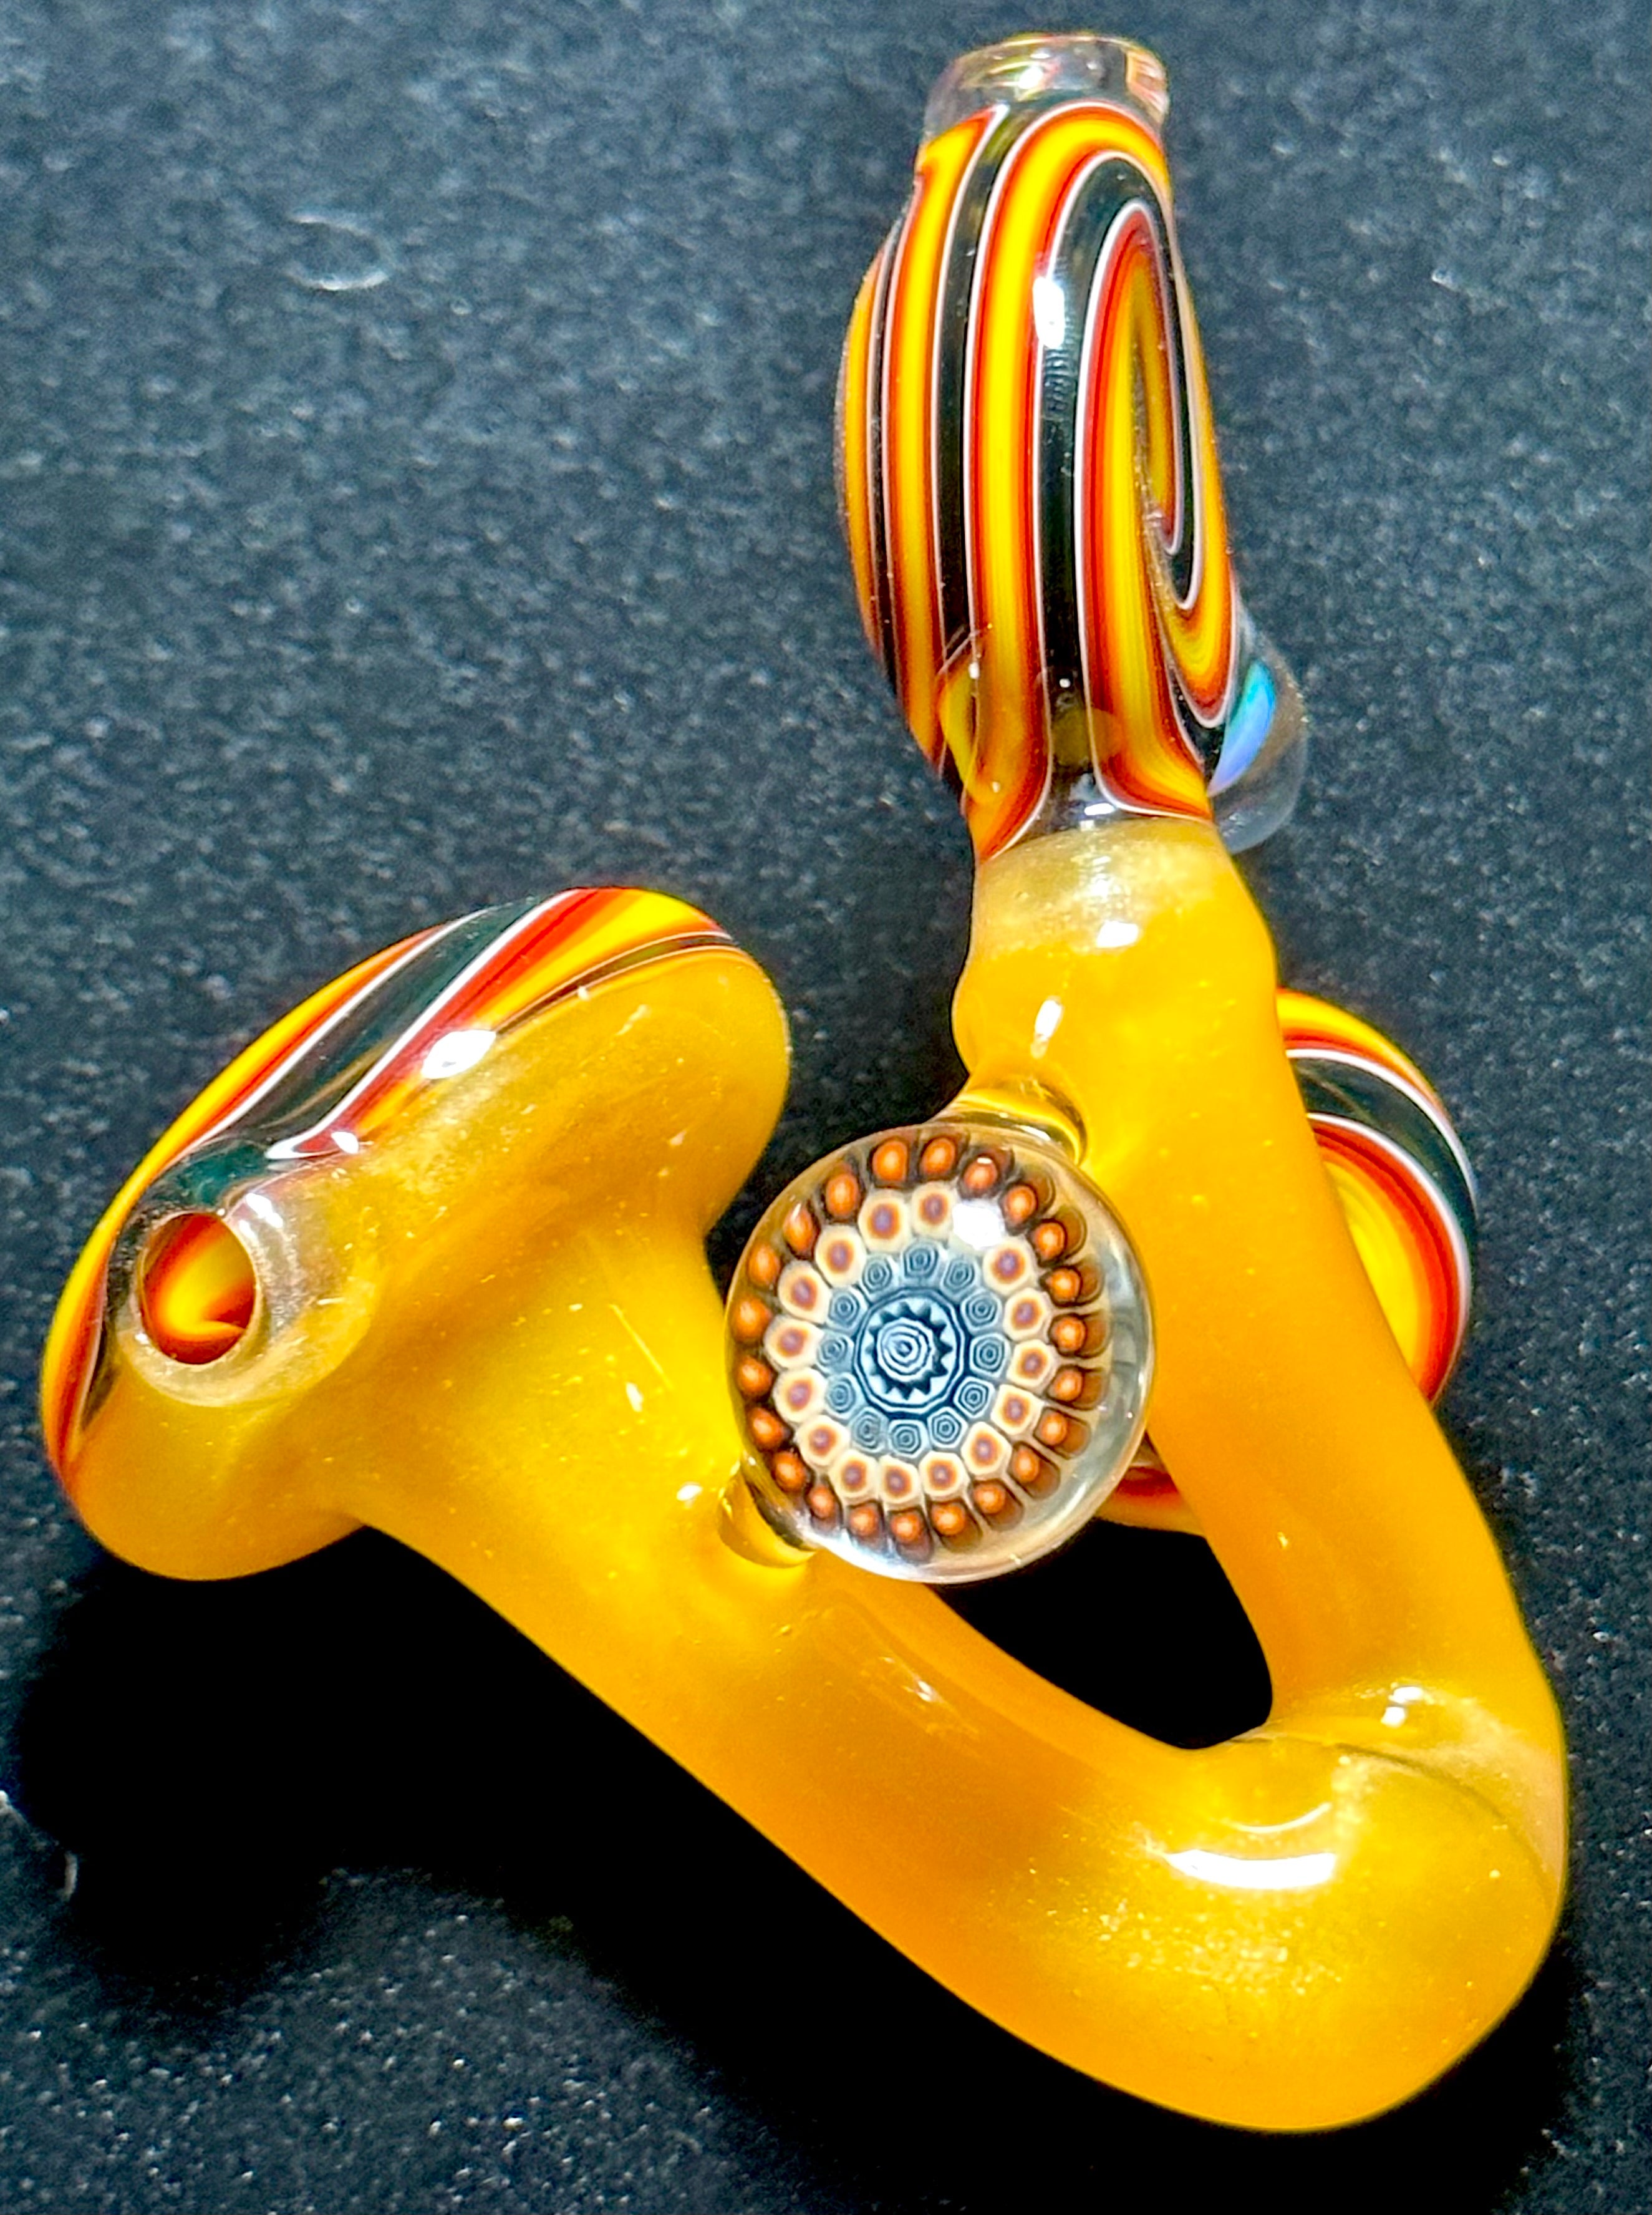 Future Glass Art Yellow & Fire Weiss Heady with Millie & Opal